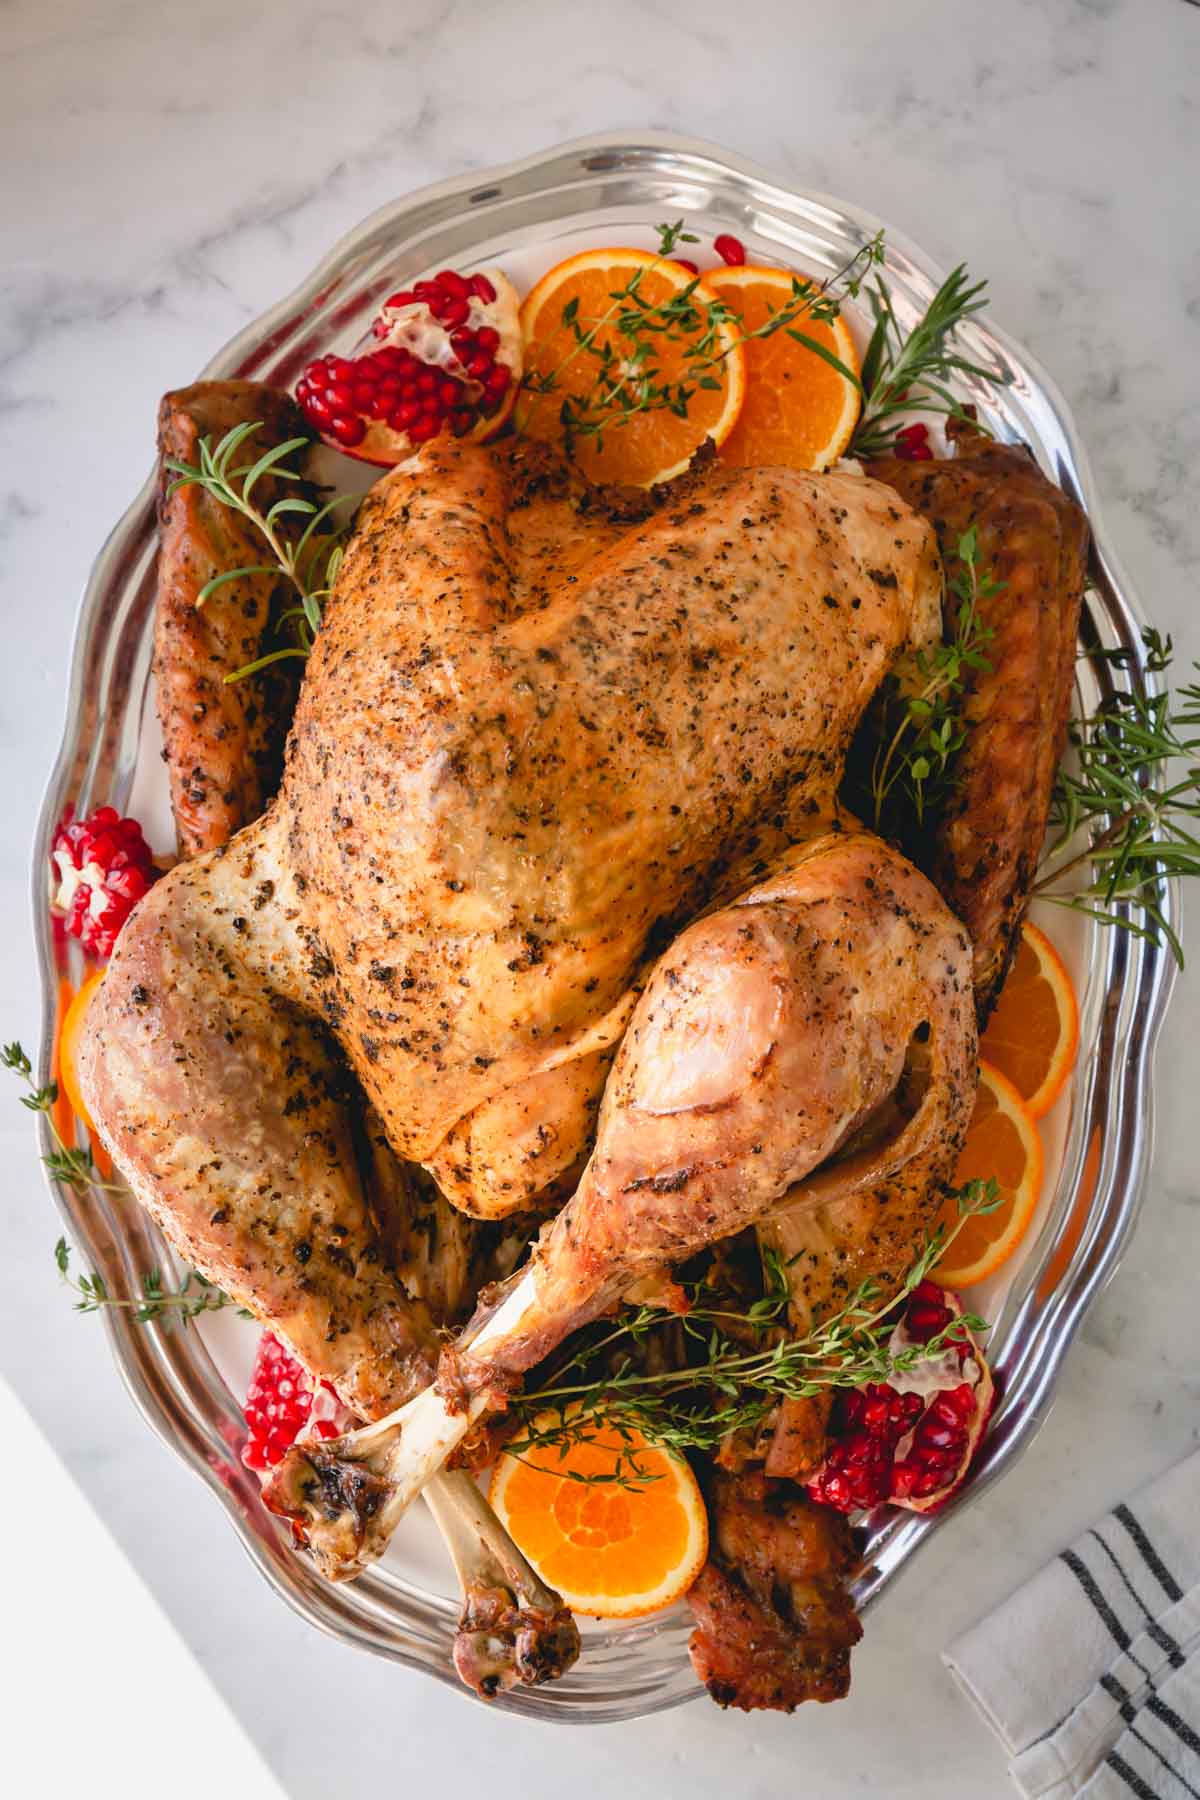 Whole roast turkey on a silver platter garnished with orange slices, pomegranate halves and fresh herbs.